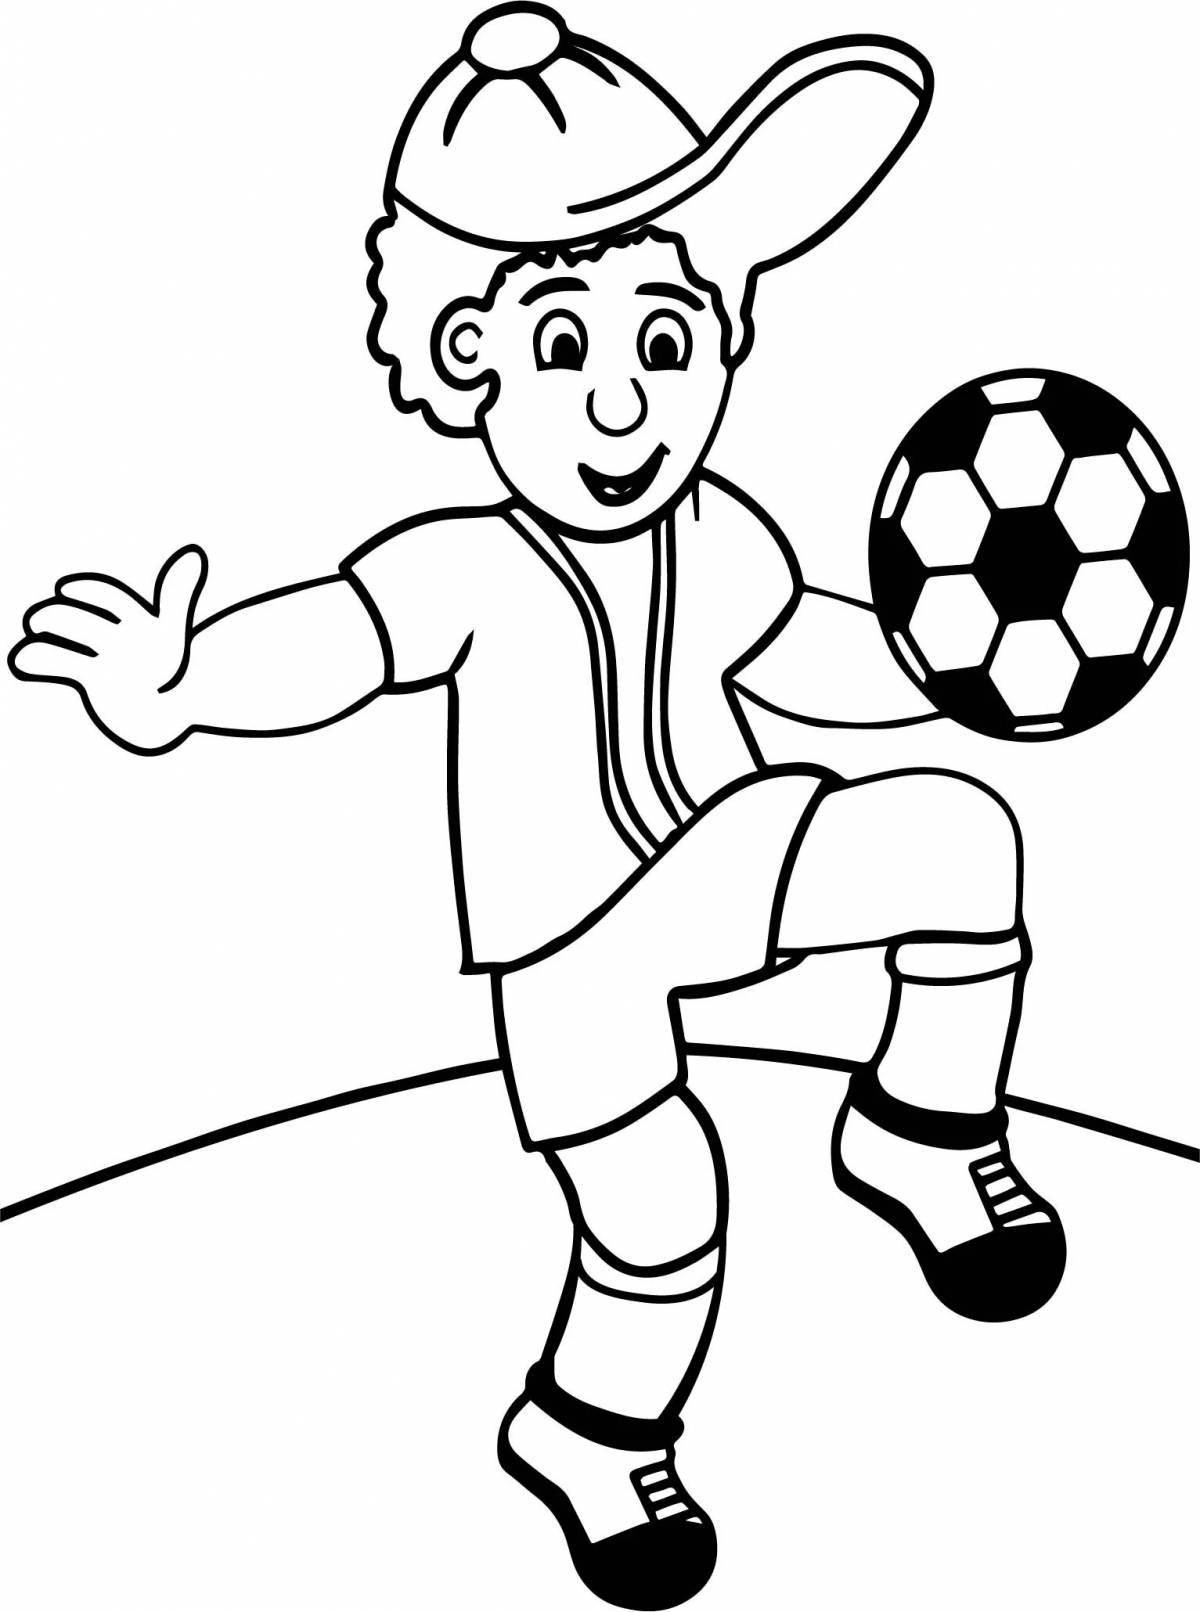 Live soccer boy coloring book